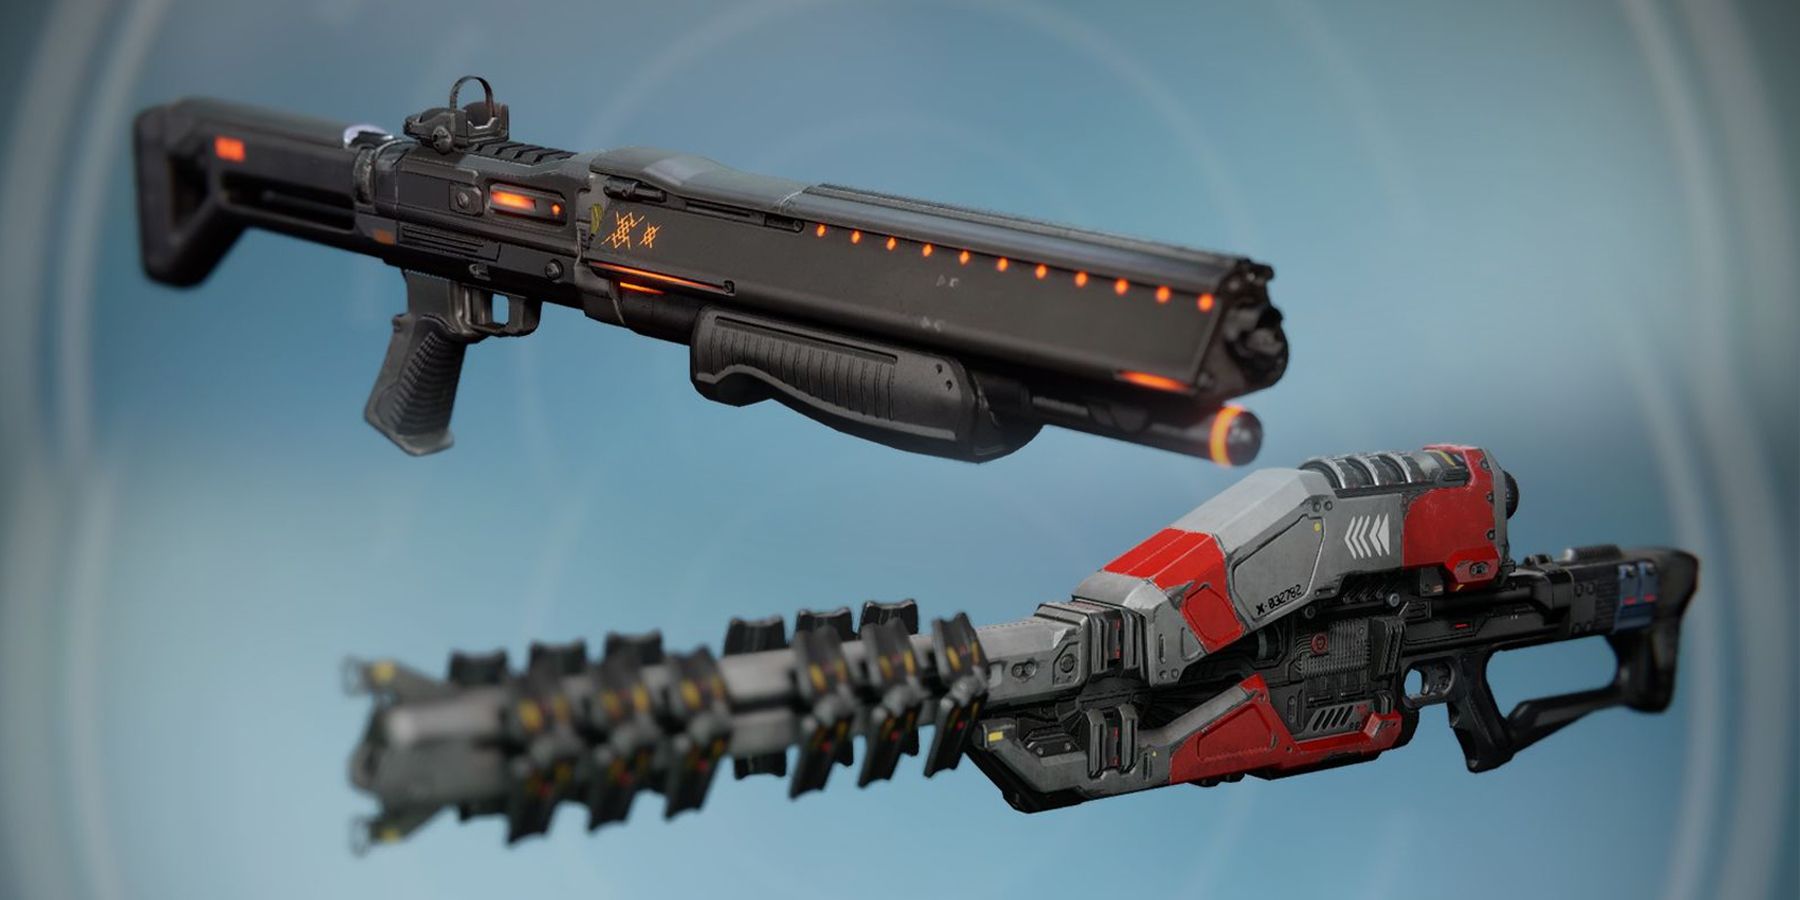 The exotic shotgun Invective and the exotic sniper rifle Ice Breaker from the first Destiny game. (Top: Invective, Bottom: Ice Breaker)